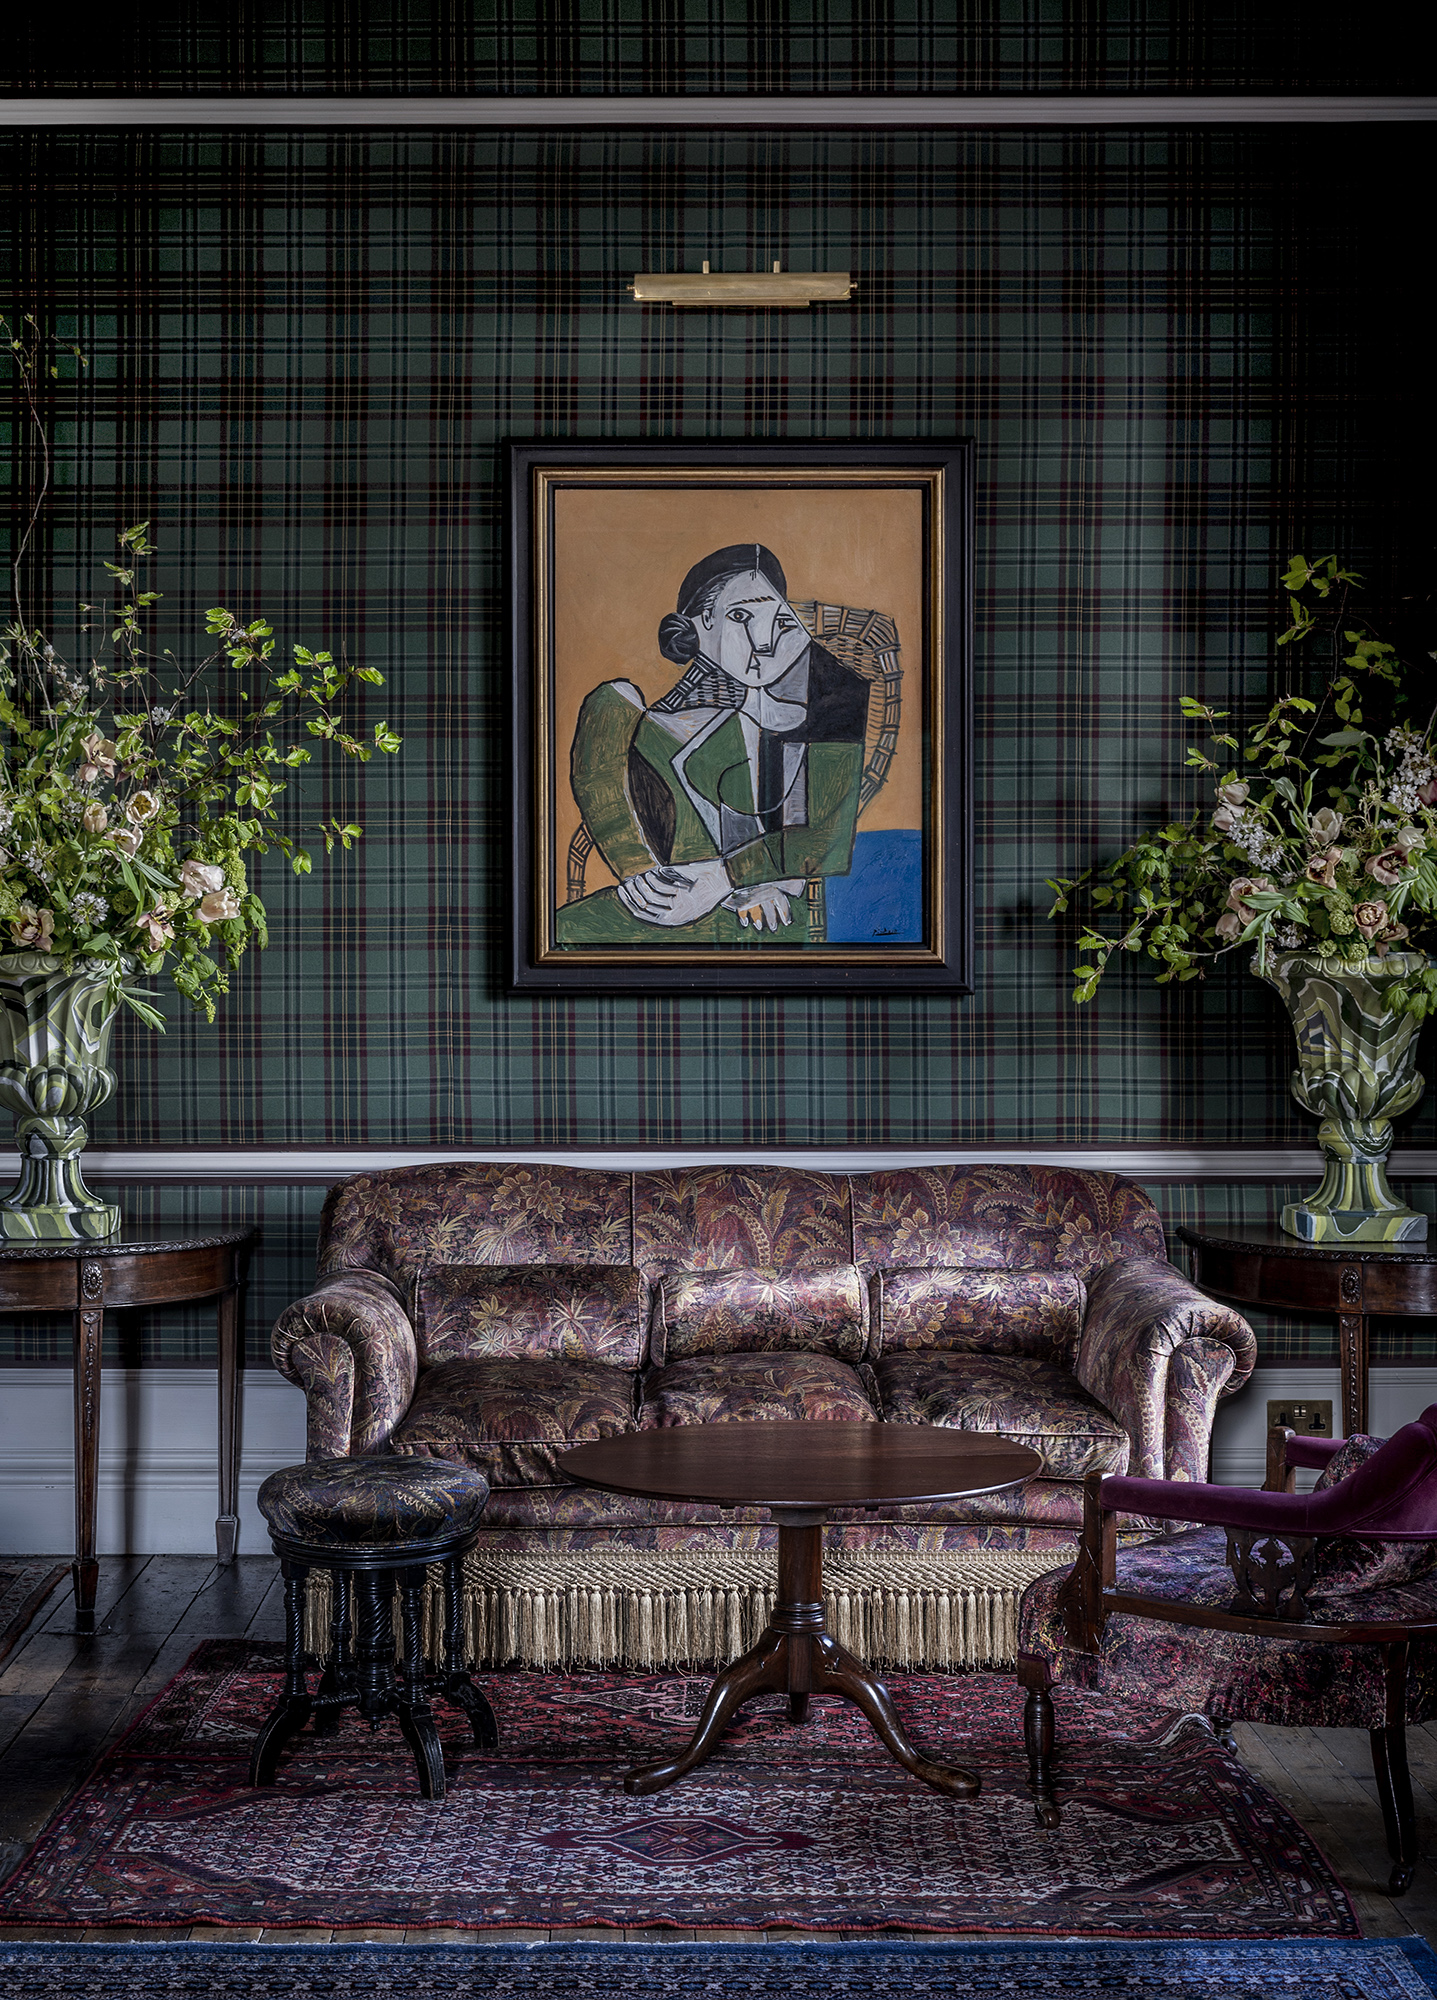 The Fife Arms’ Drawing Room with Pablo Picasso’s Femme assise dans un fauteuil (Woman seated in an armchair), 1953, on show